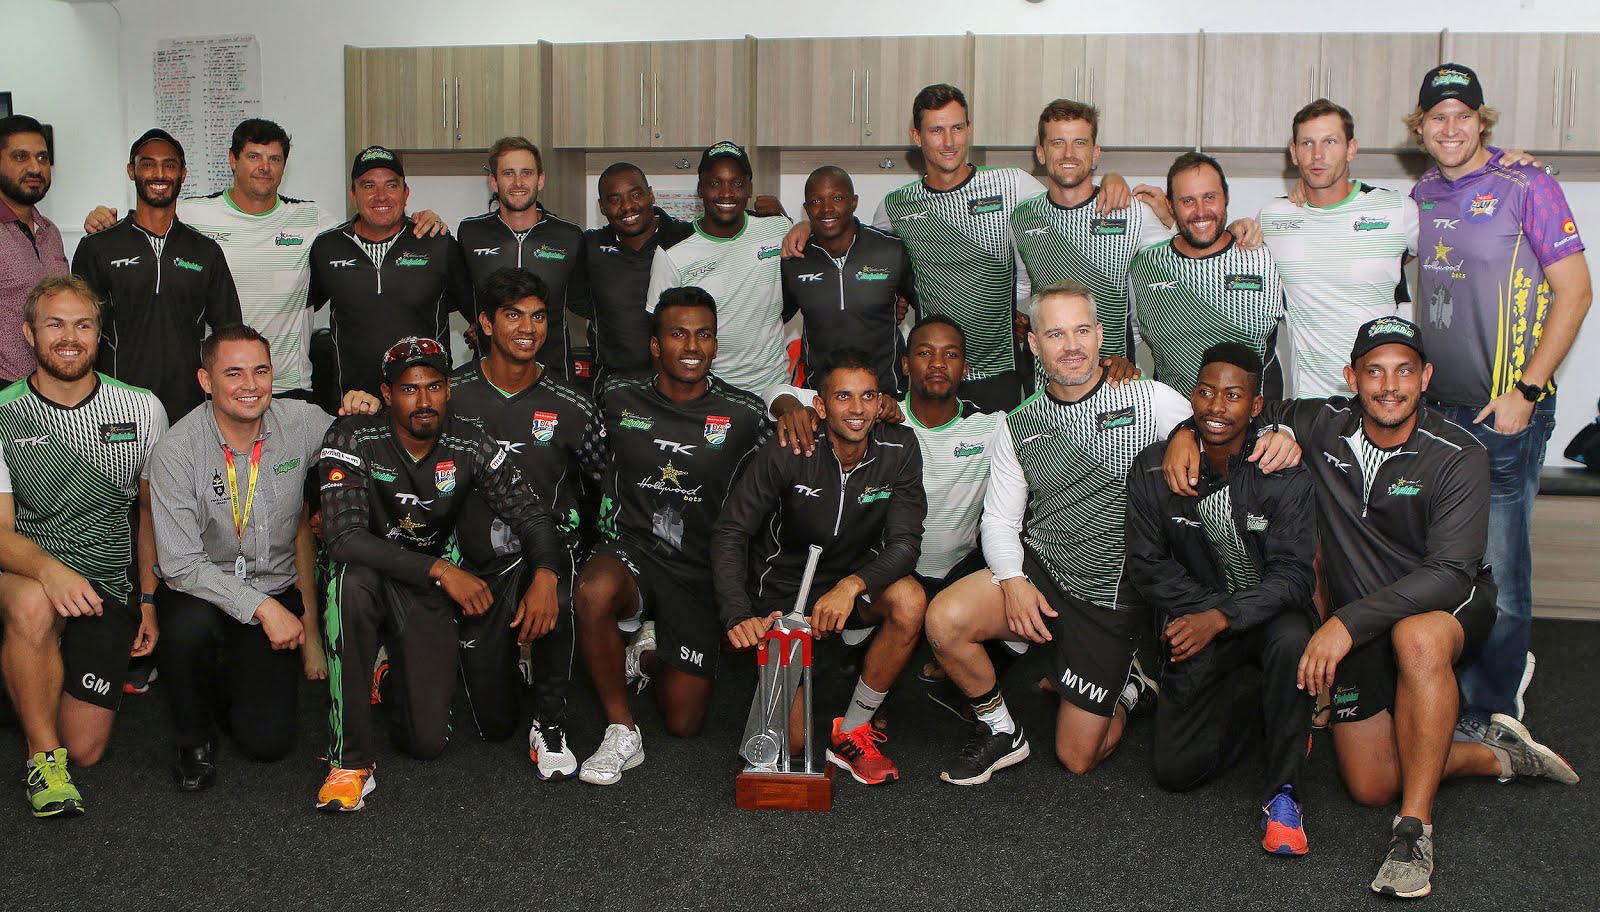 Hollywoodbets Dolphins - Momentum One Day Cup Champions - 2017/18 Season - Team posing